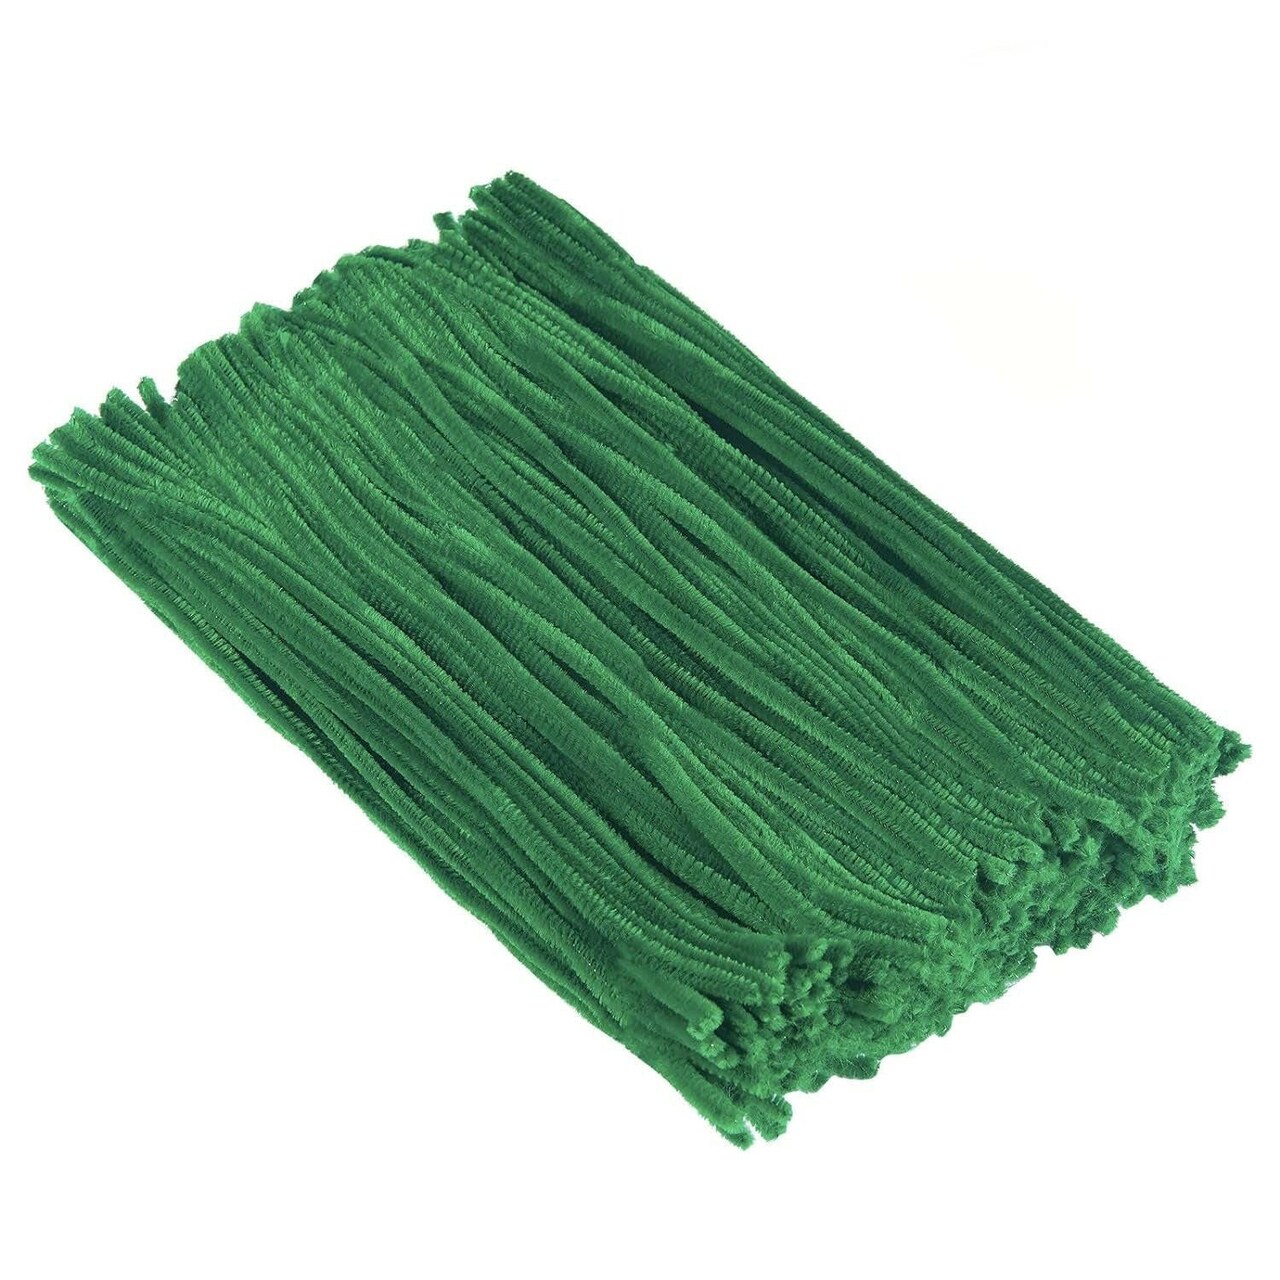 Pipe Cleaners Craft Supplies - 300Pcs Dark Green Pipe Cleaners